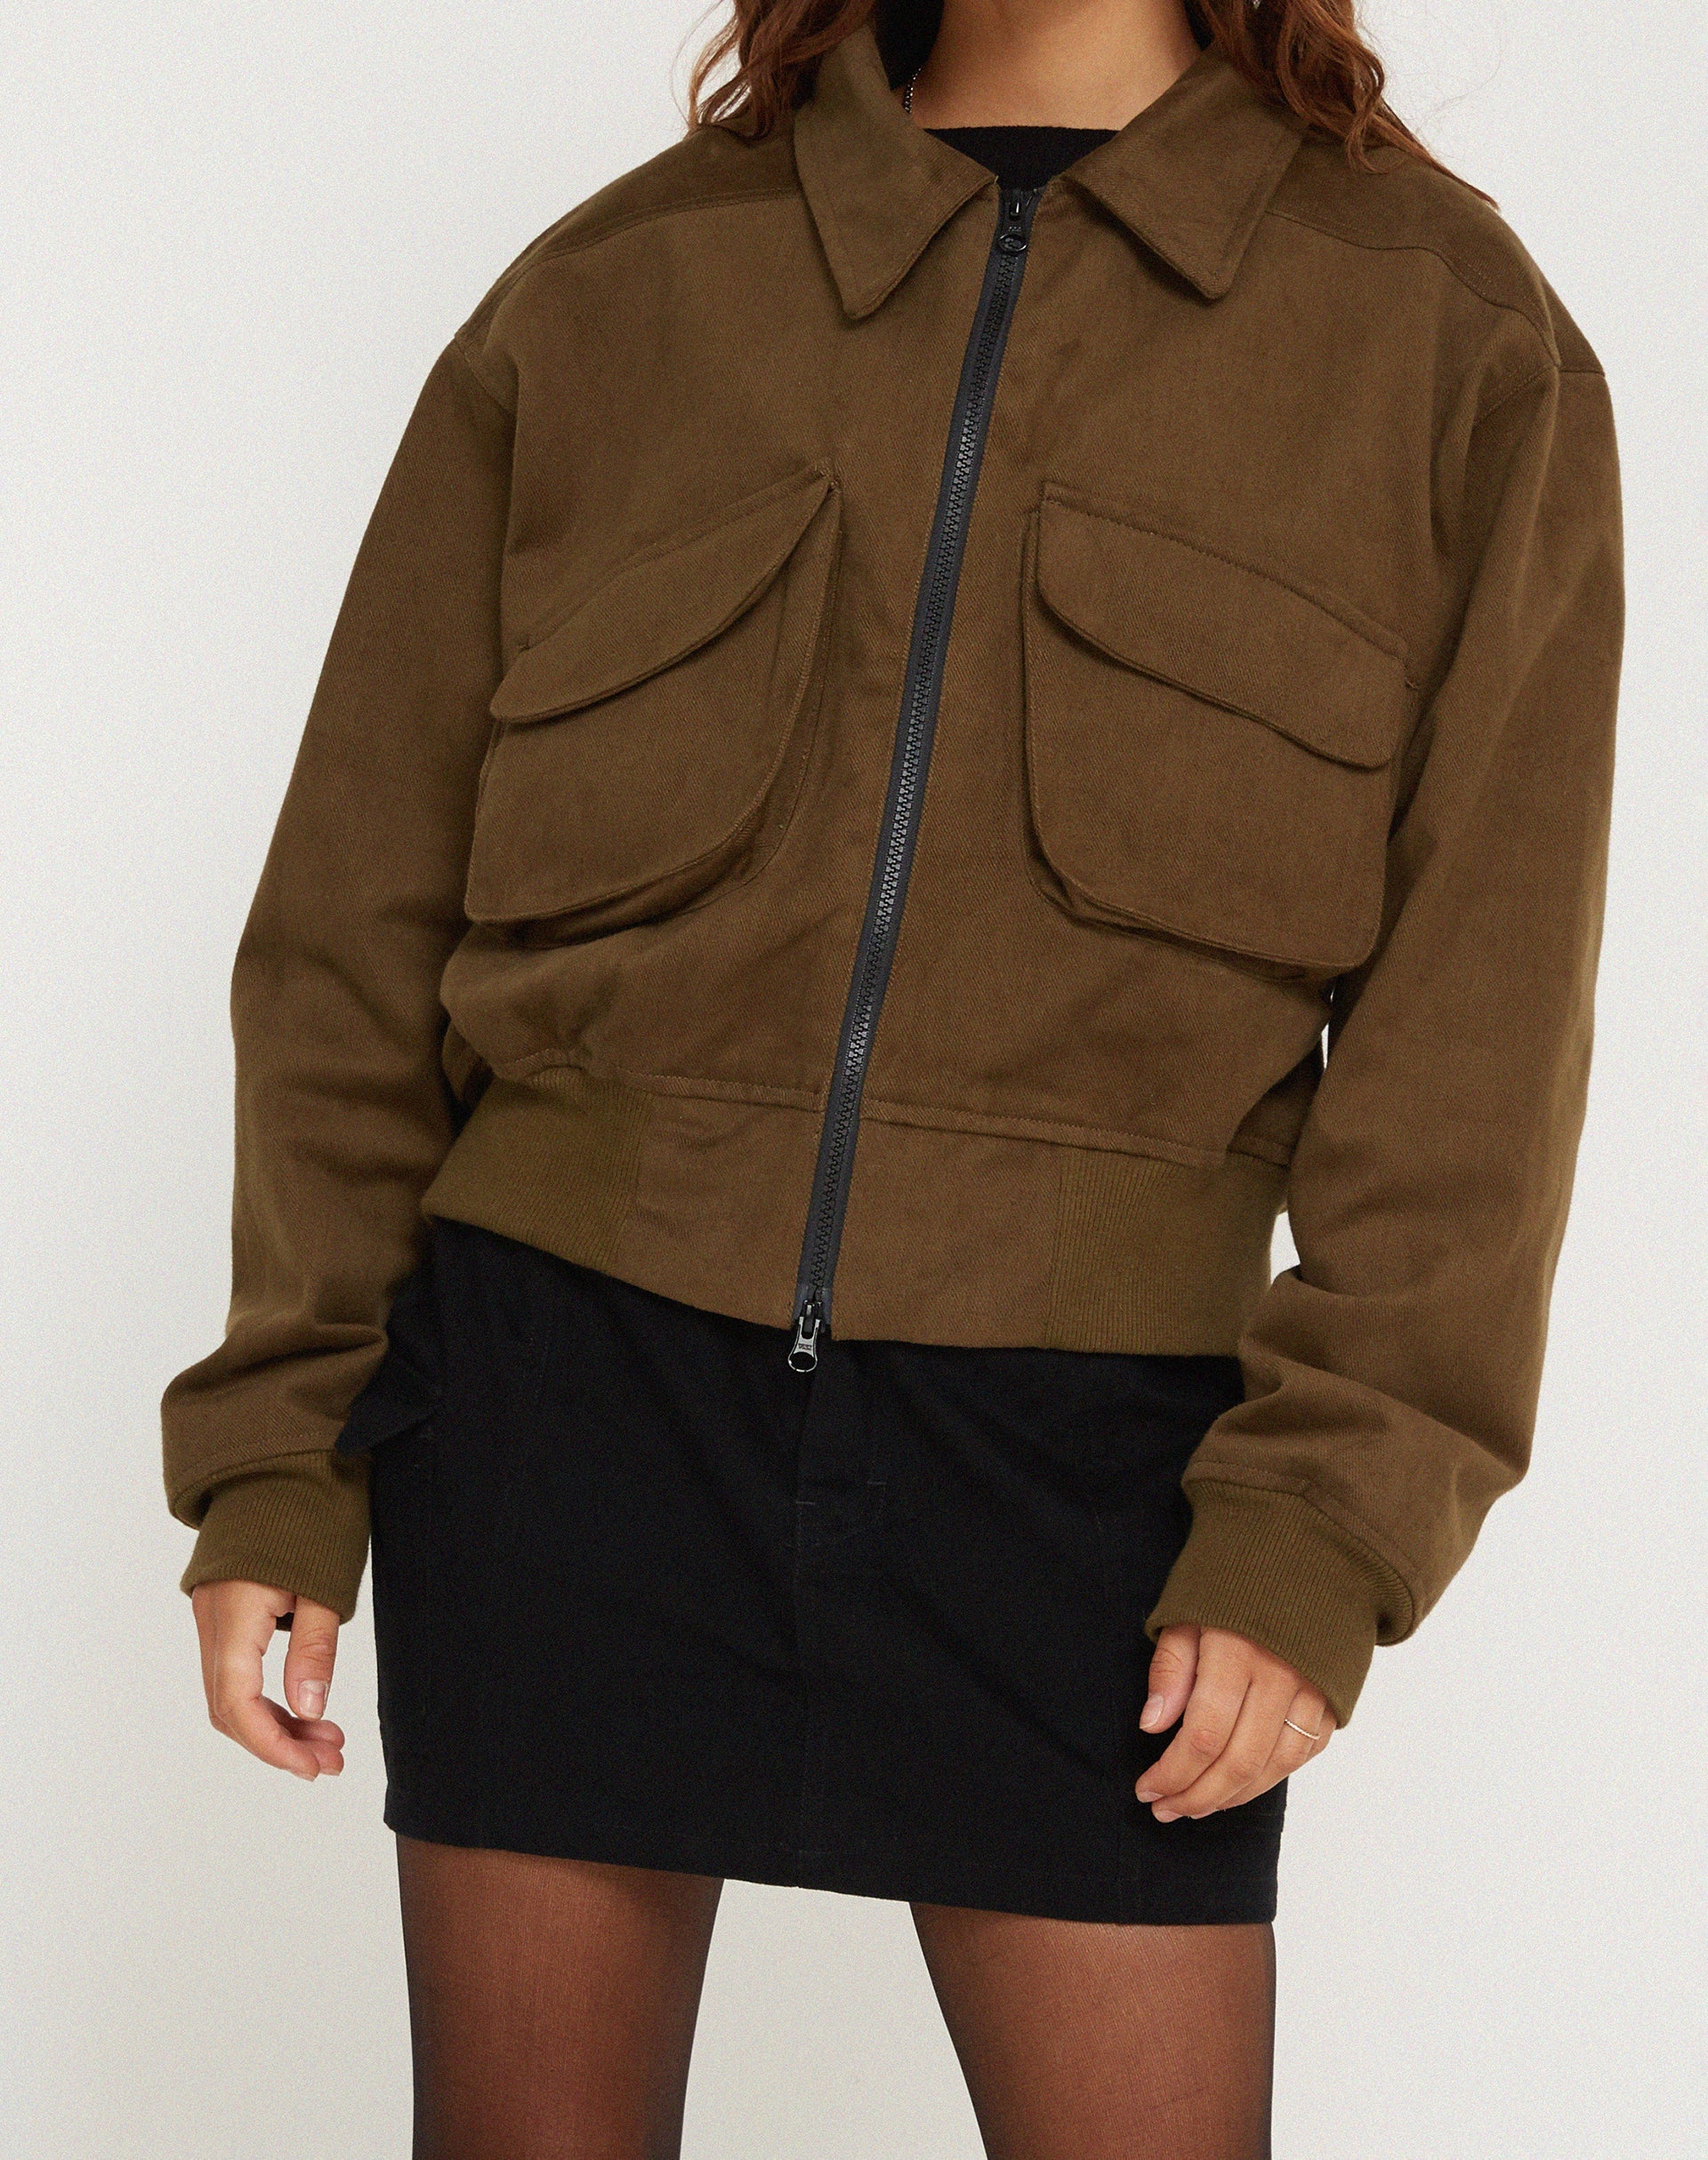 image of MA2 Jacket in Twill Suede Khaki